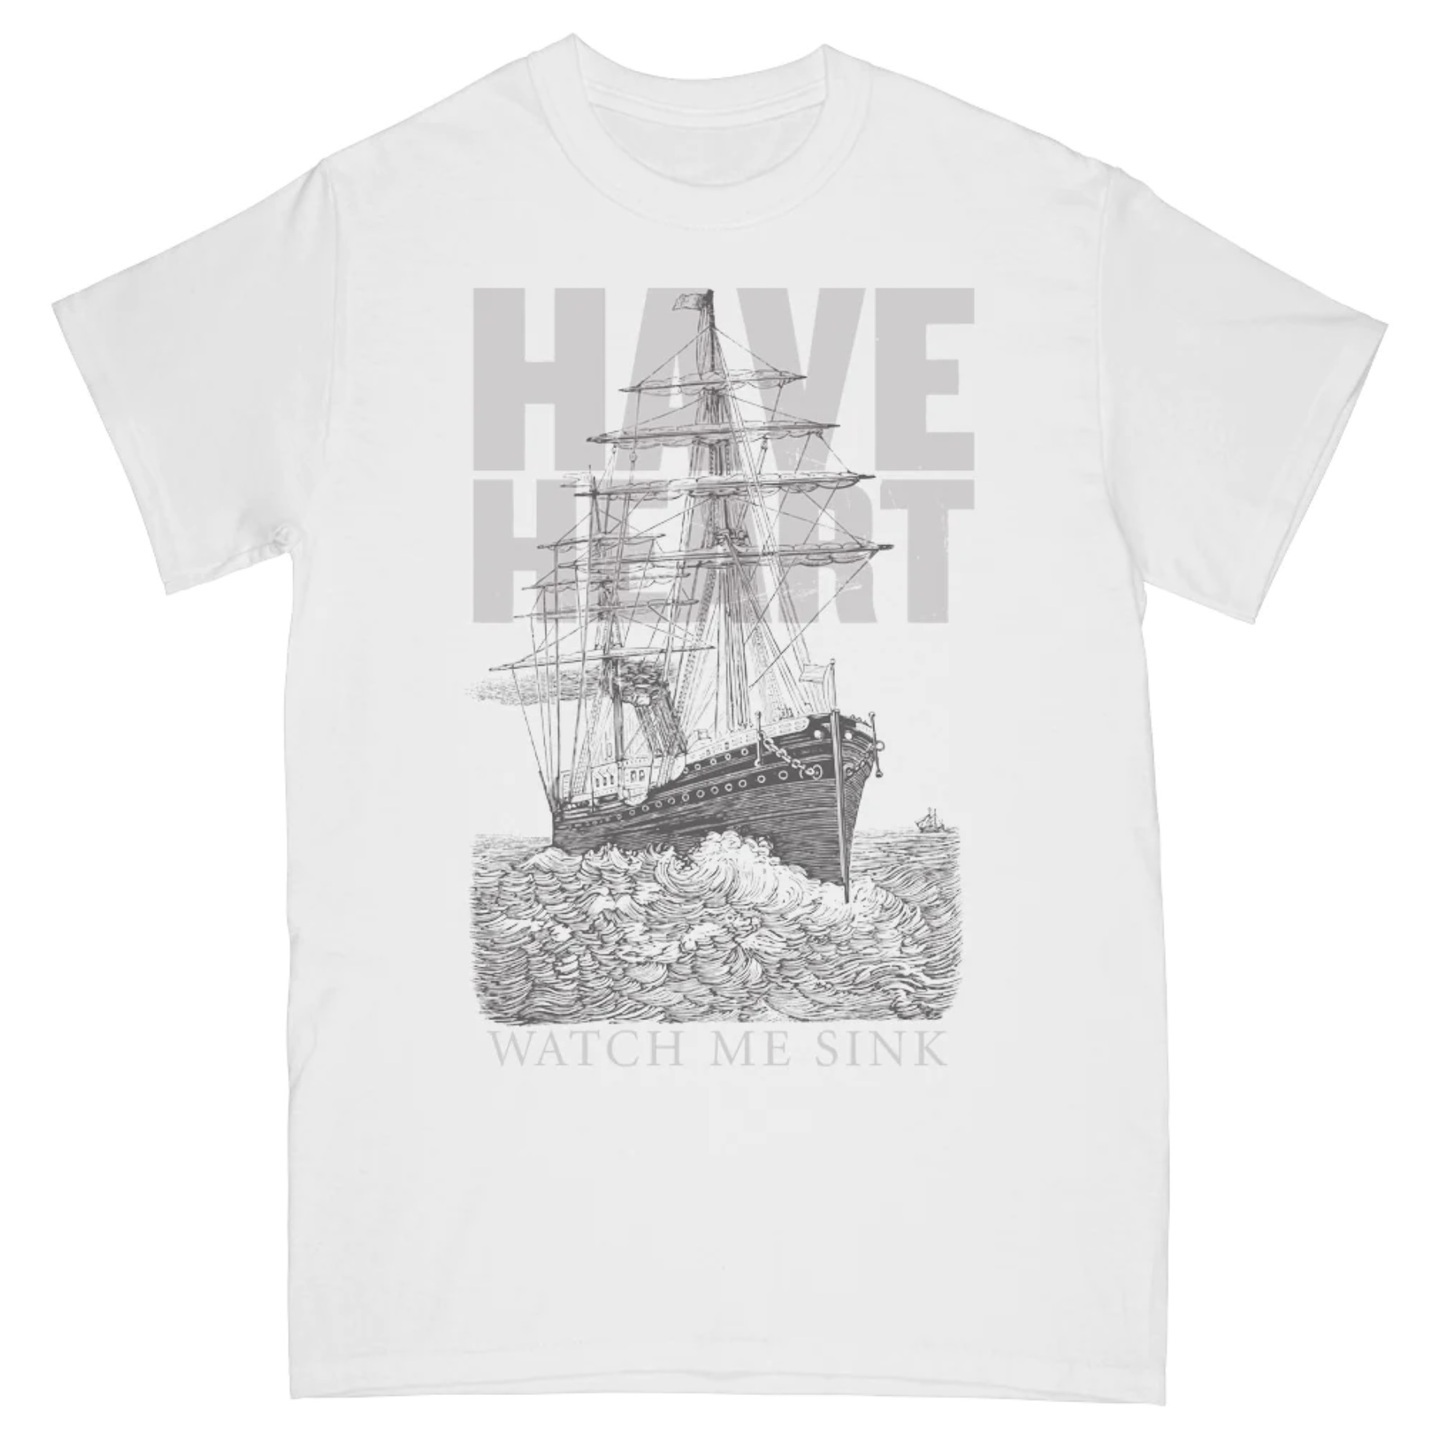 HAVE HEART - Watch Me Sink